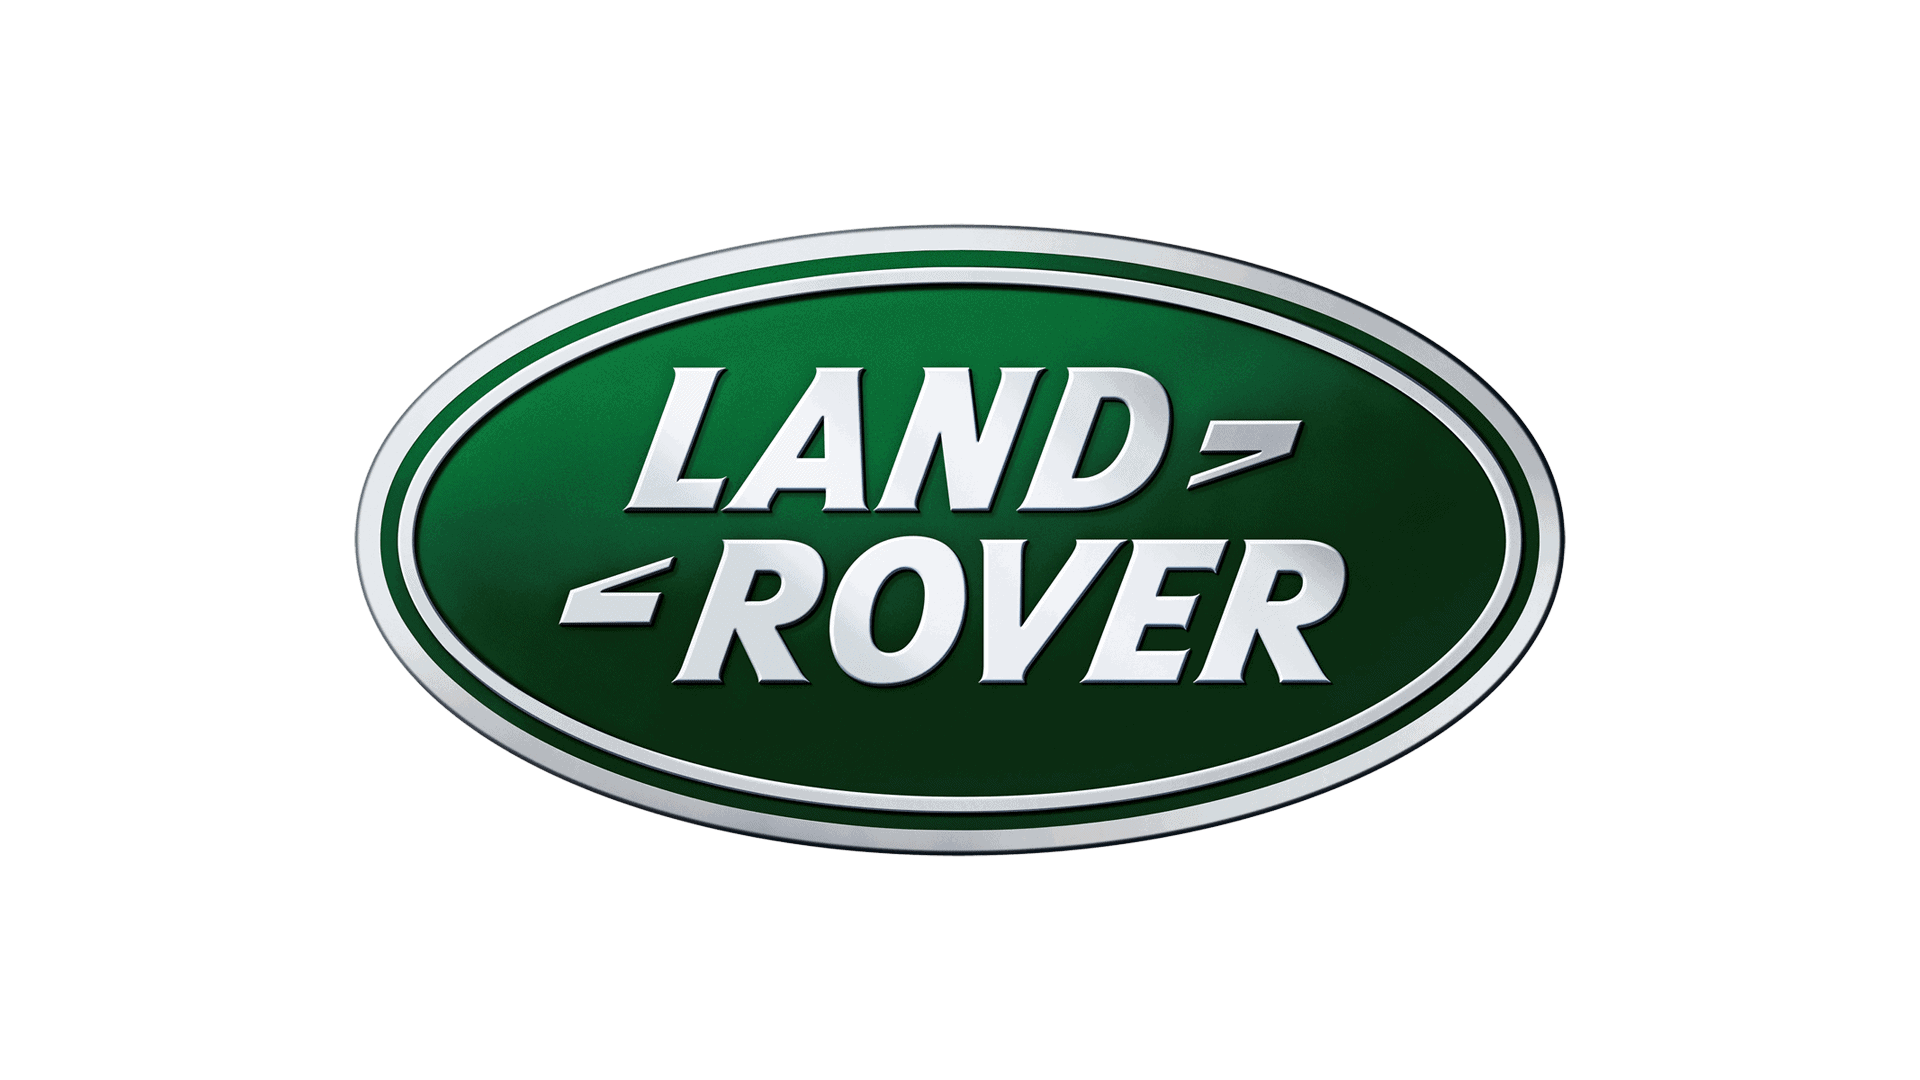 Review opdrachtgever Bconnect Land Rover